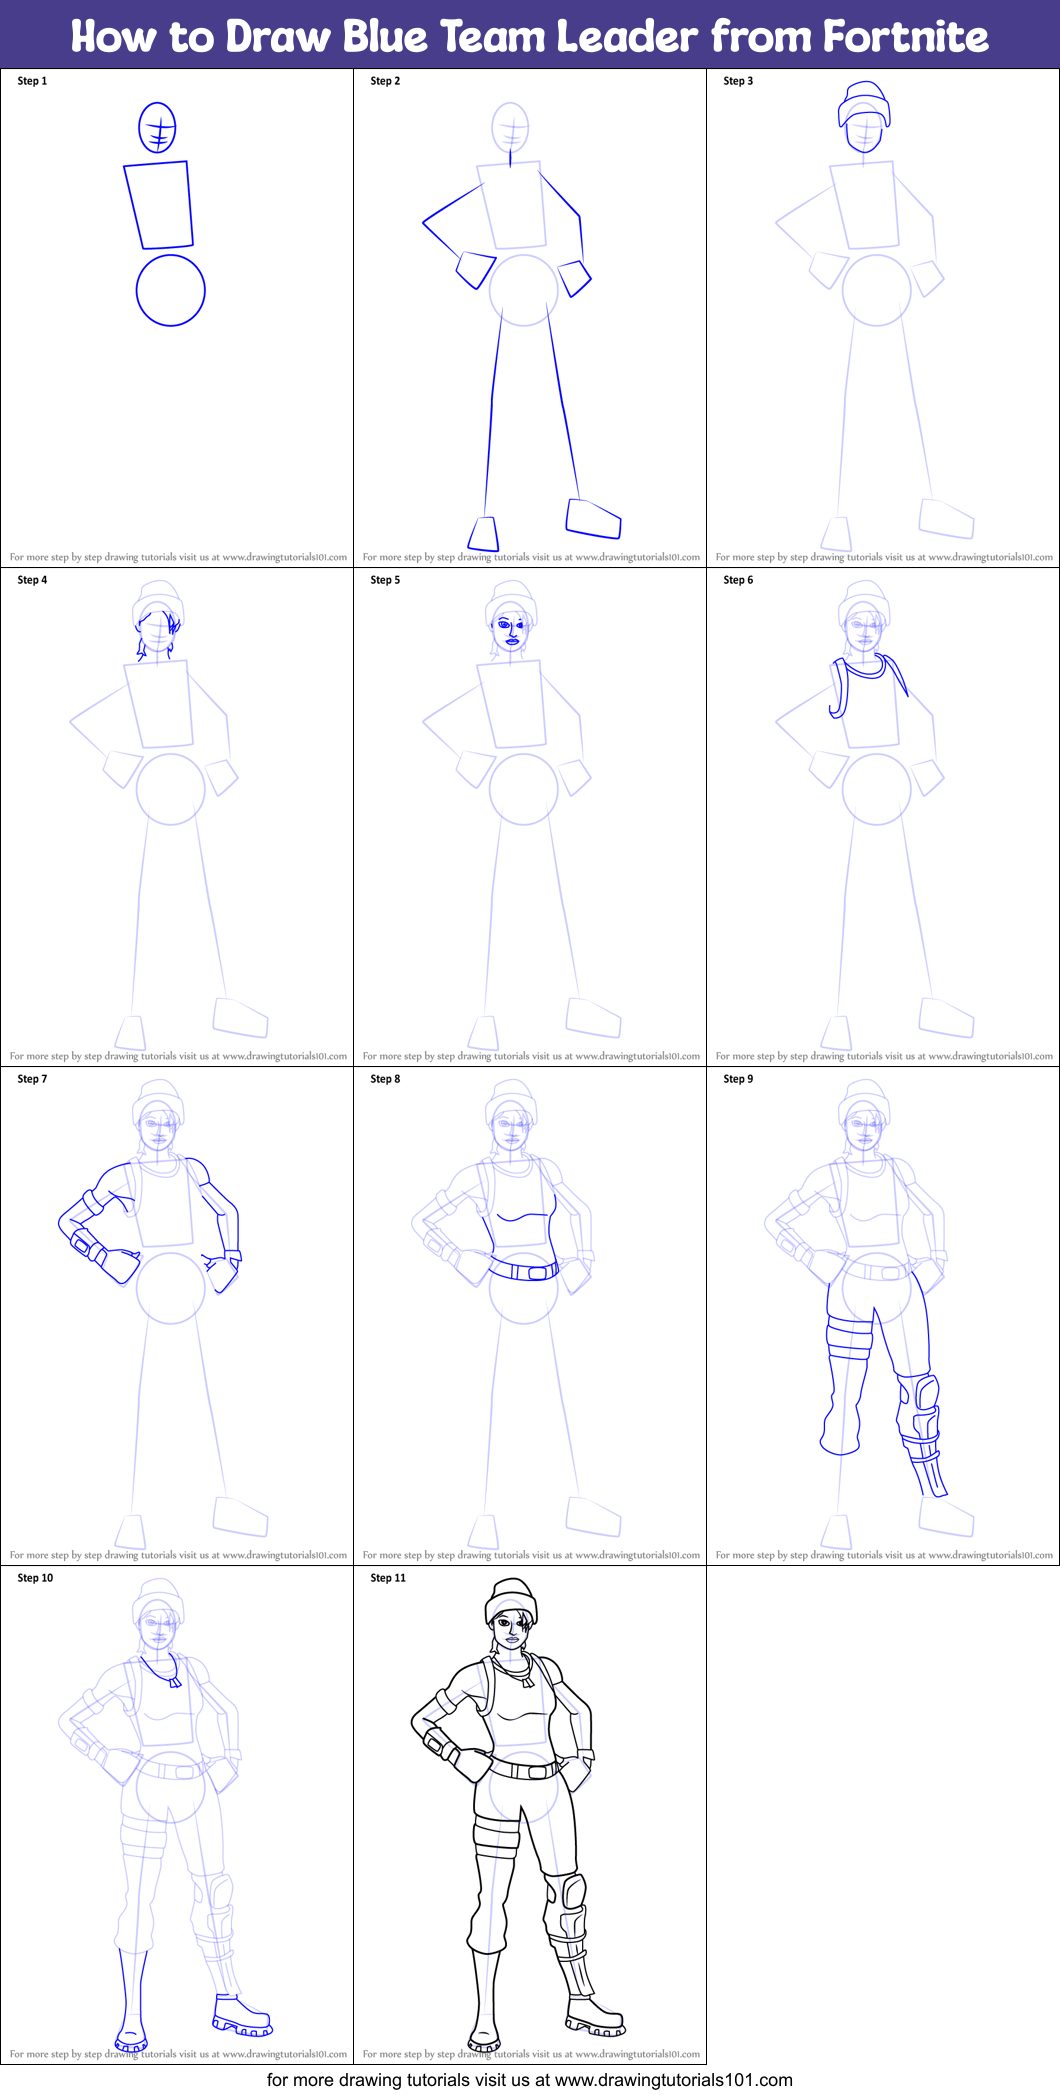 How to Draw Blue Team Leader from Fortnite printable by step drawing DrawingTutorials101.com